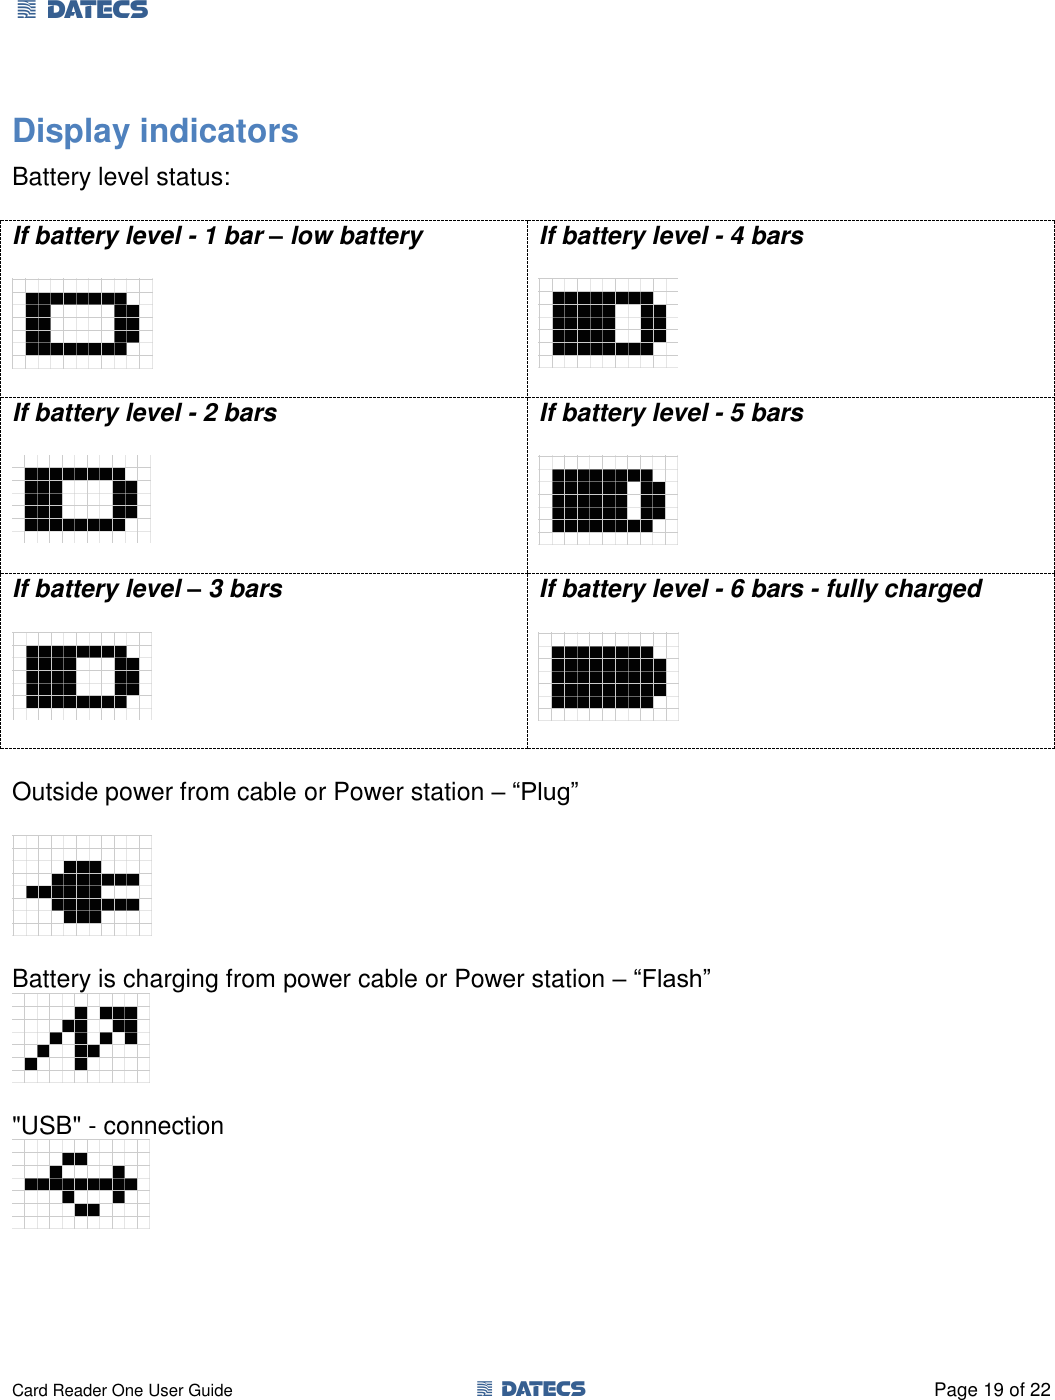 1 DATECS       Card Reader One User Guide  1 DATECS  Page 19 of 22 Display indicators Battery level status:  If battery level - 1 bar – low battery    If battery level - 4 bars    If battery level - 2 bars    If battery level - 5 bars    If battery level – 3 bars    If battery level - 6 bars - fully charged    Outside power from cable or Power station – “Plug”    Battery is charging from power cable or Power station – “Flash”   &quot;USB&quot; - connection    